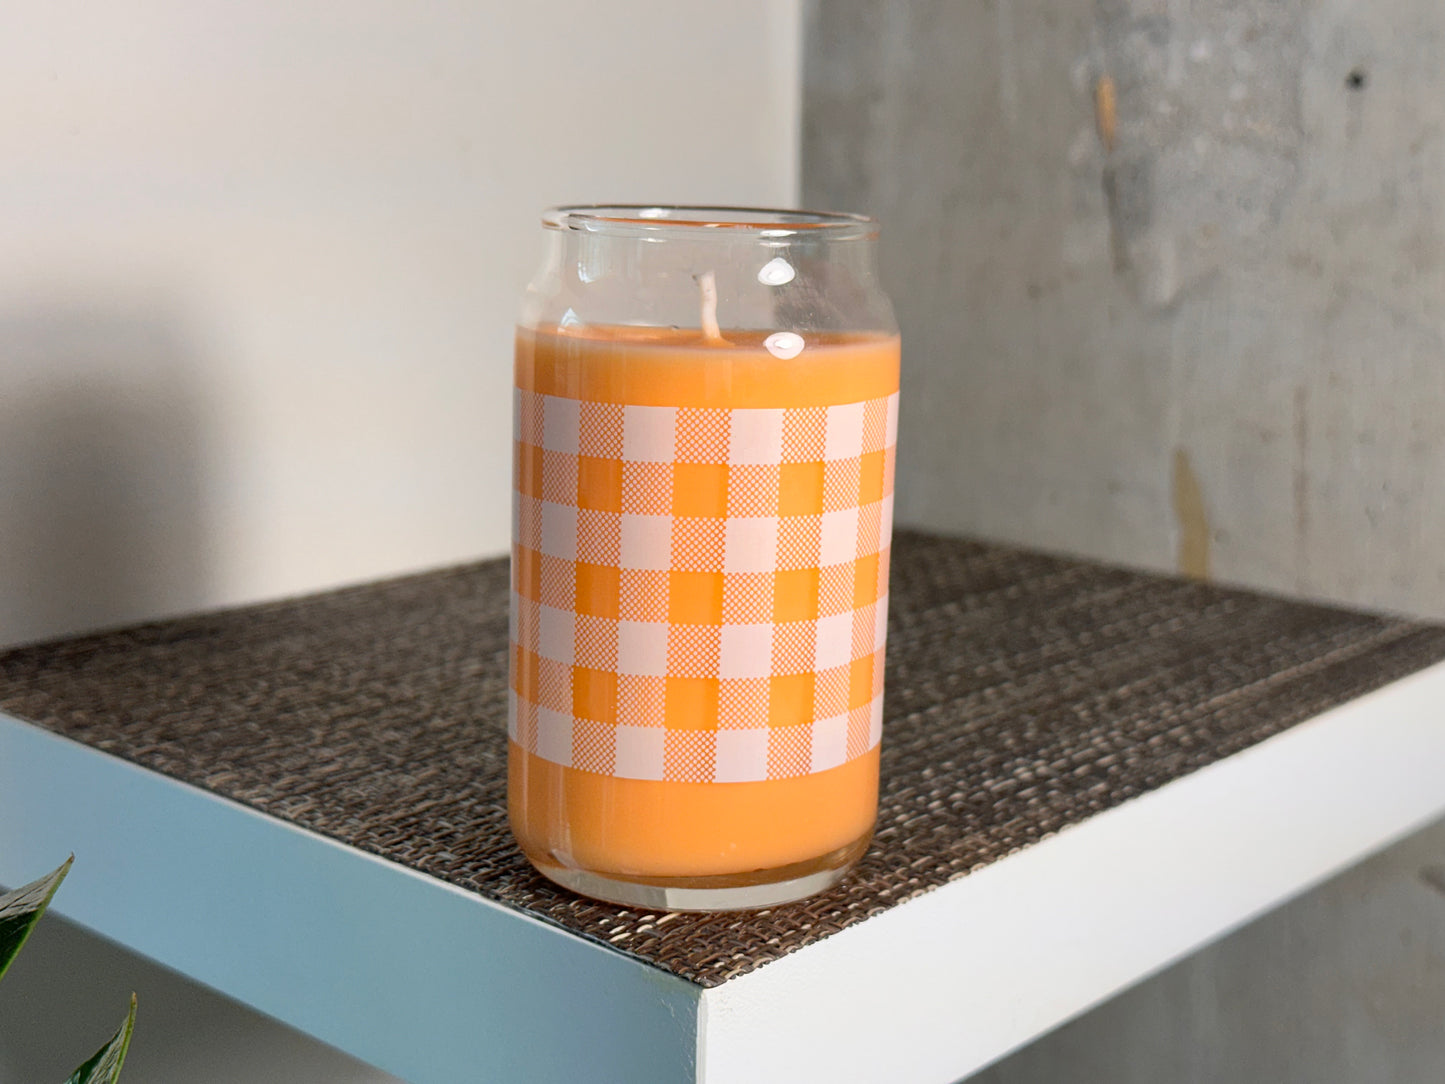 Mandarin Premium Hand-Poured, Gingham-Patterned Candle